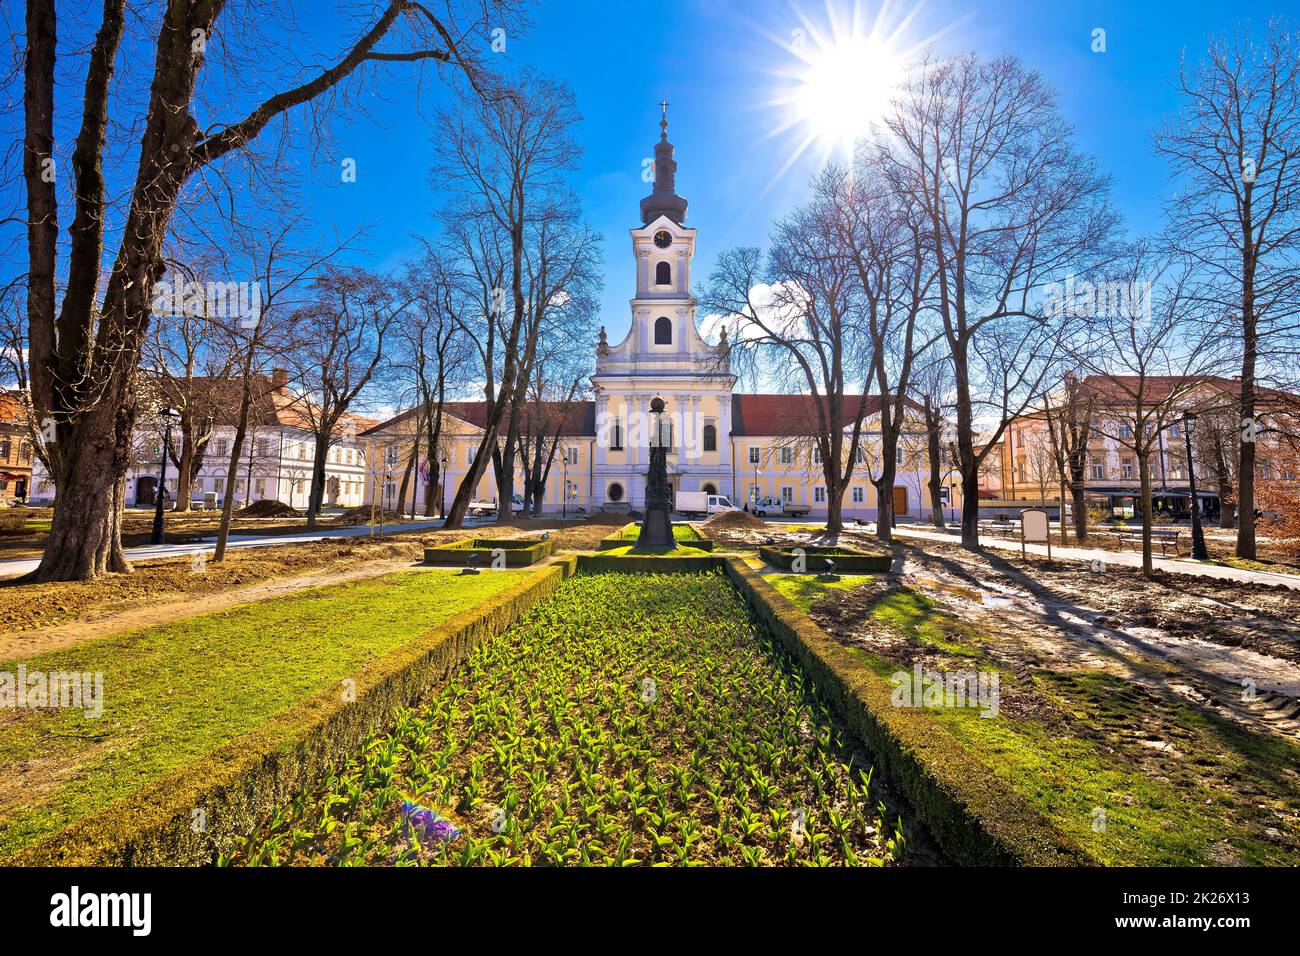 Town of Bjelovar central park and church view Stock Photo